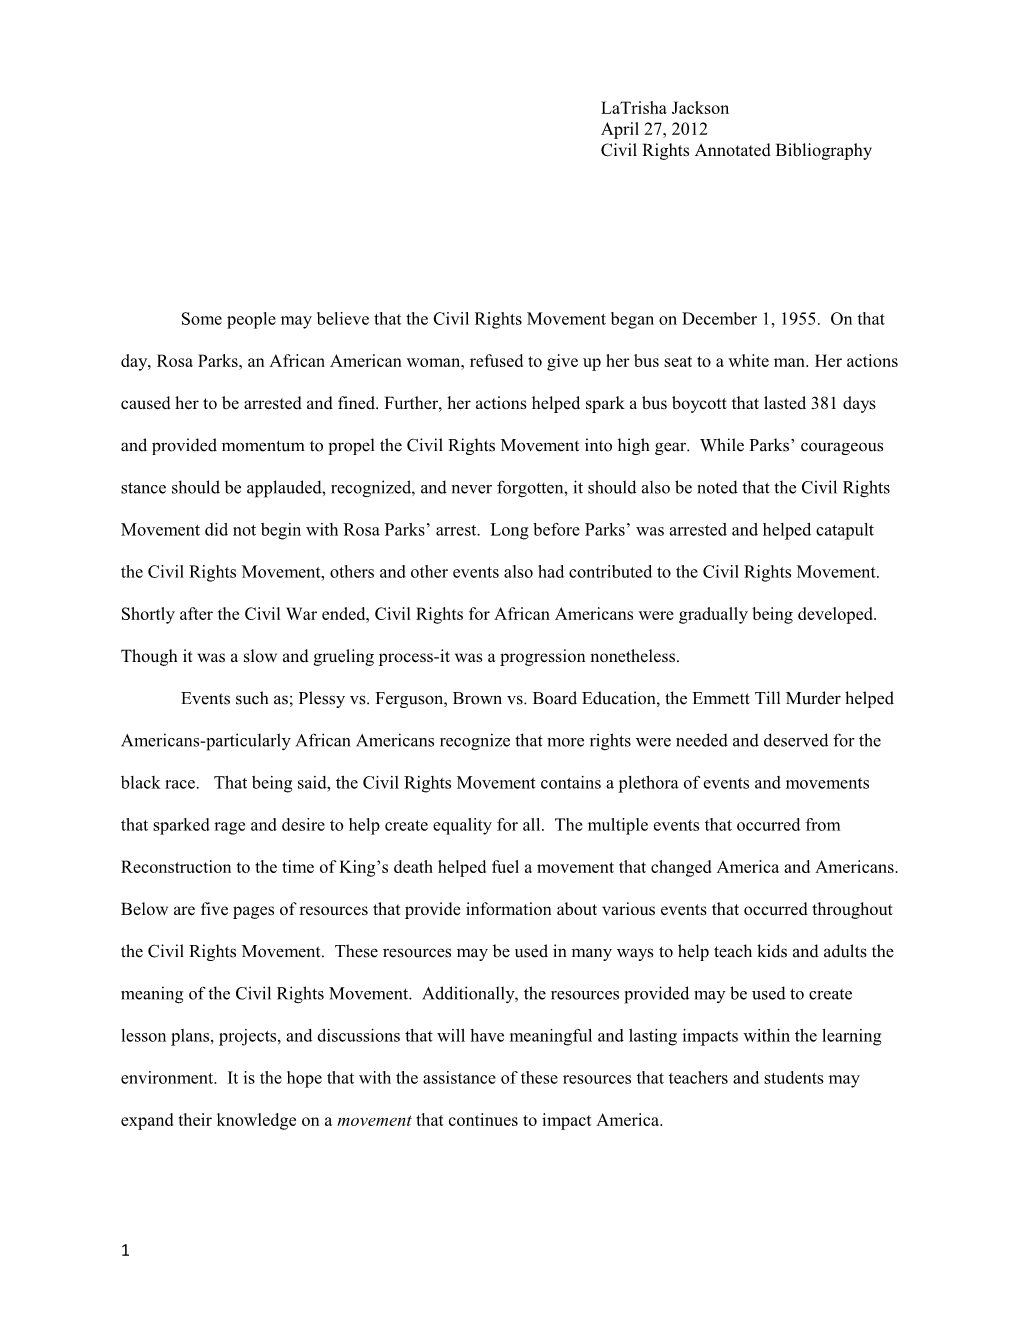 Civil Rights Annotated Bibliography